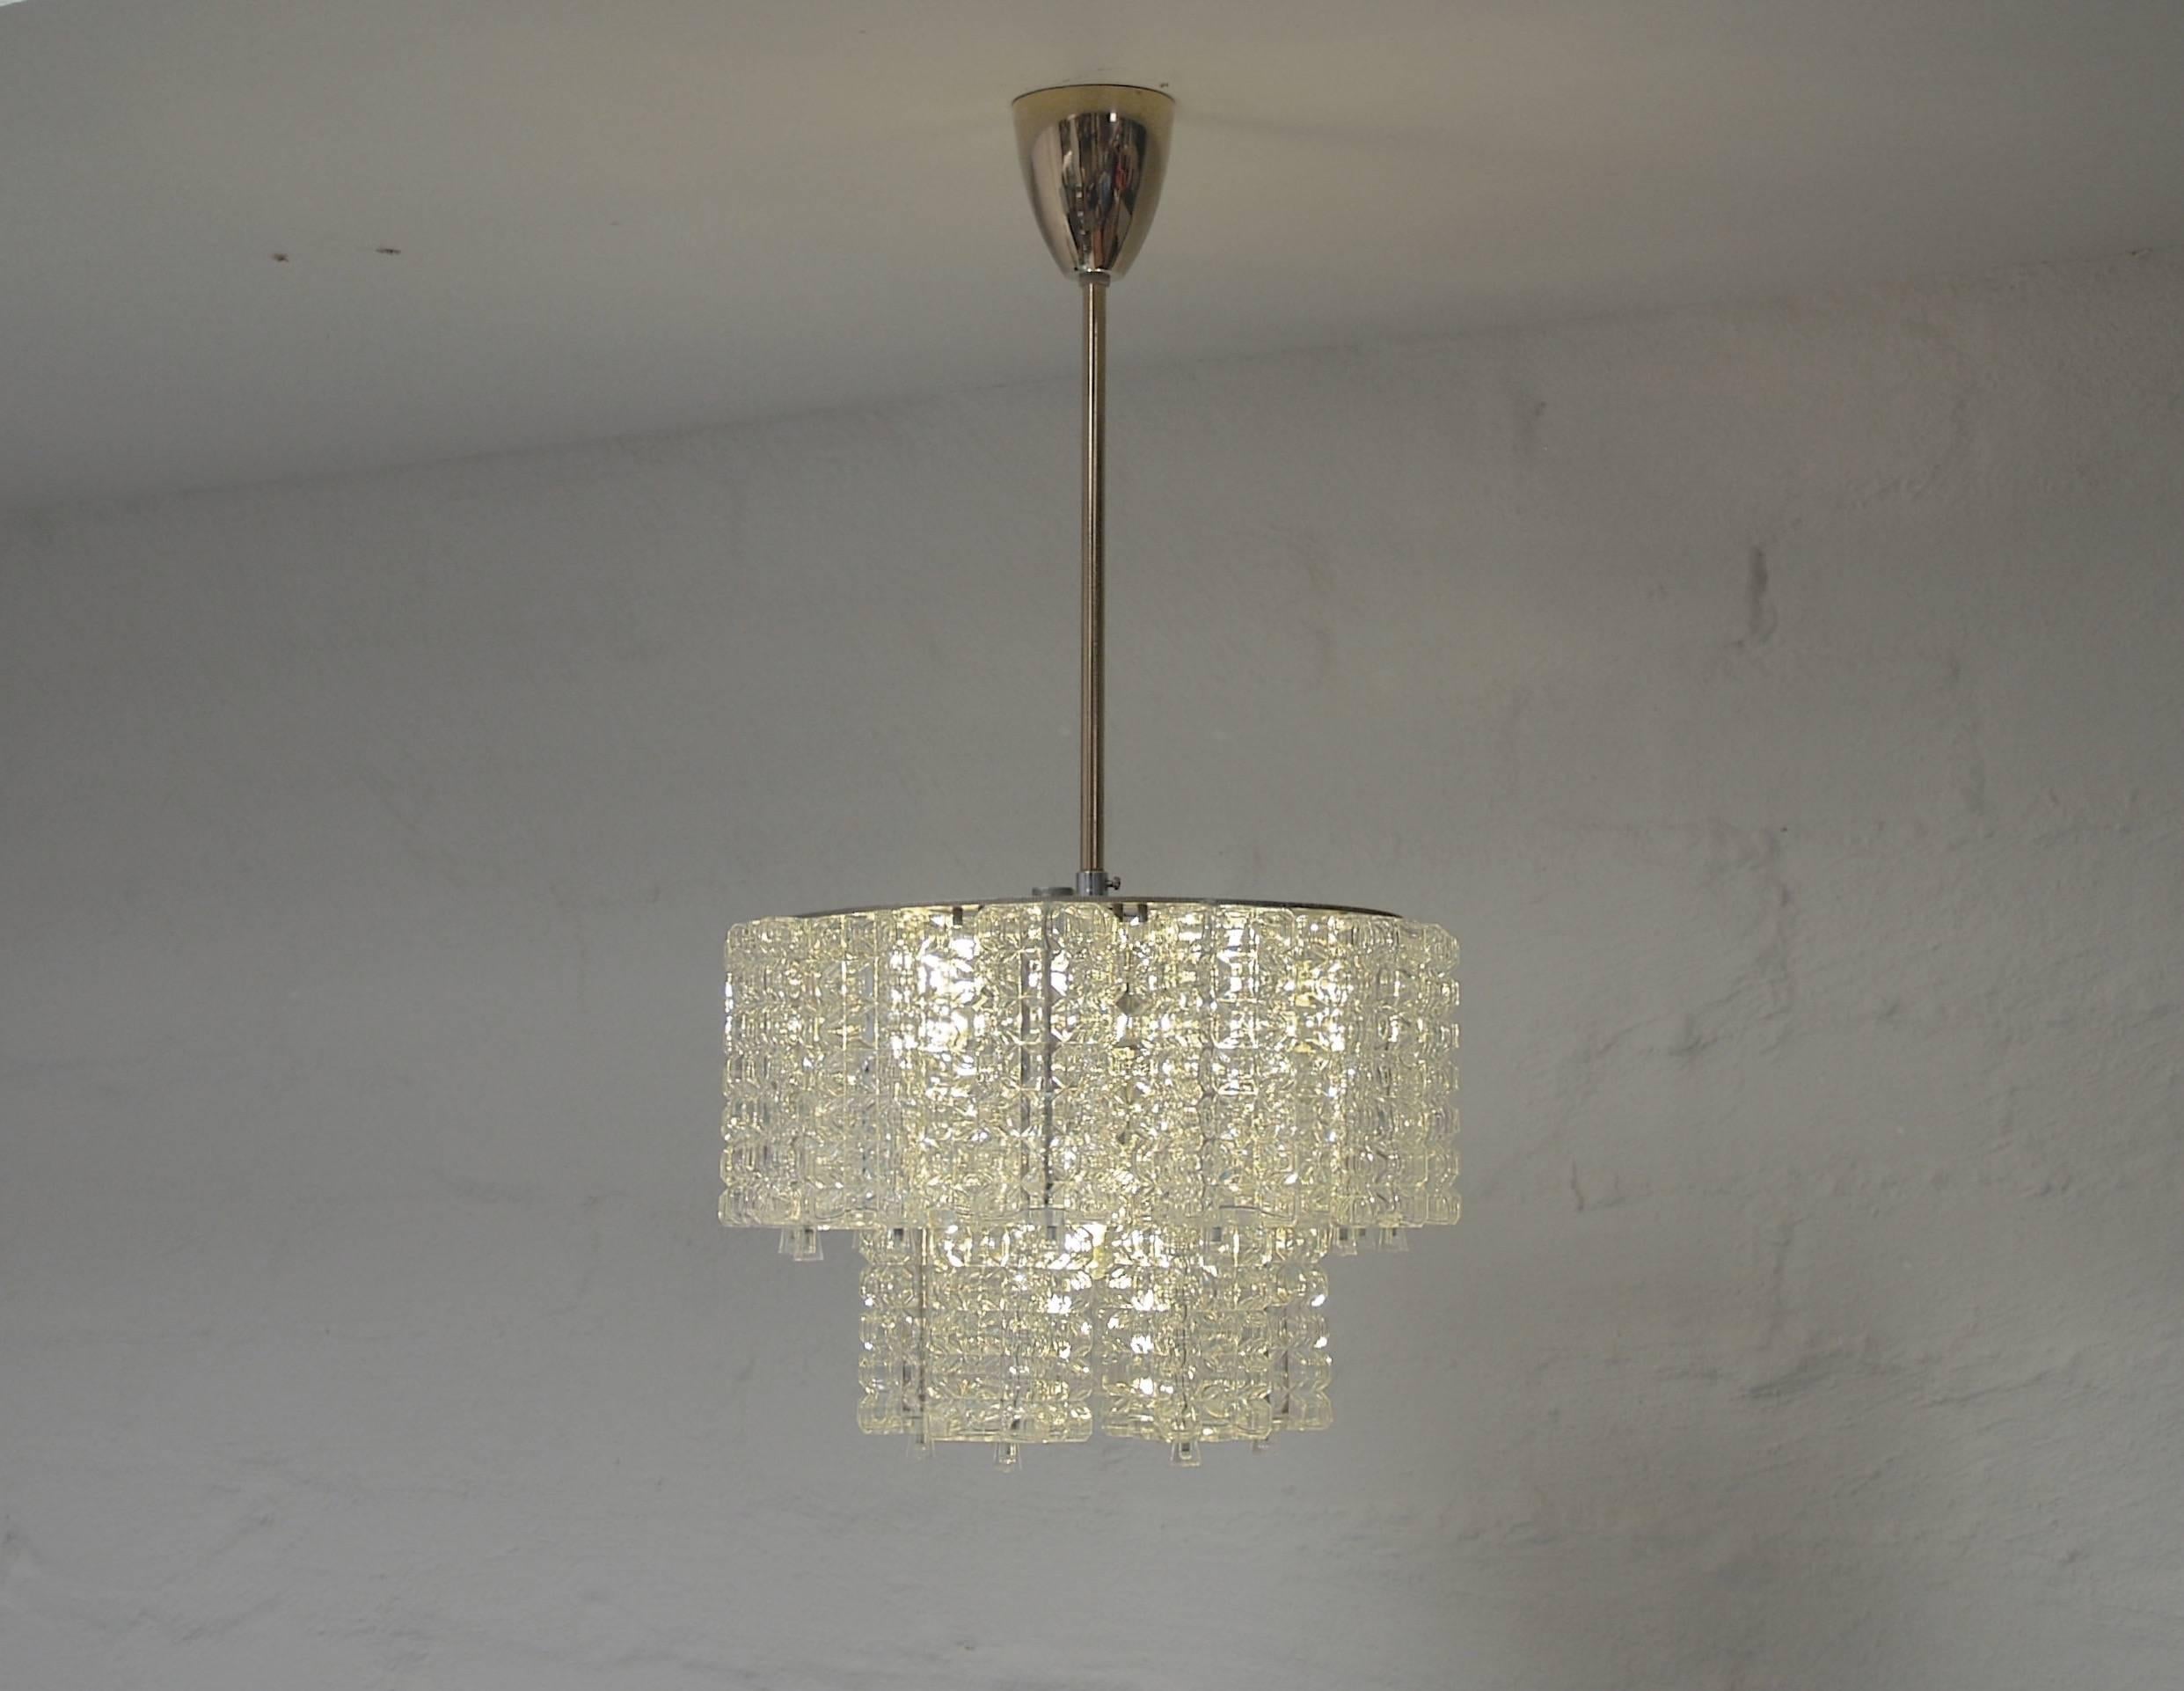 There is no hiding the shameless glamour of these petite chandeliers. Exceptional quality, painstakingly restored. They cast a lovely even glow.

Price for the pair. 

Two spare crystals come with each light. Nickel two-tiered gallery with chrome